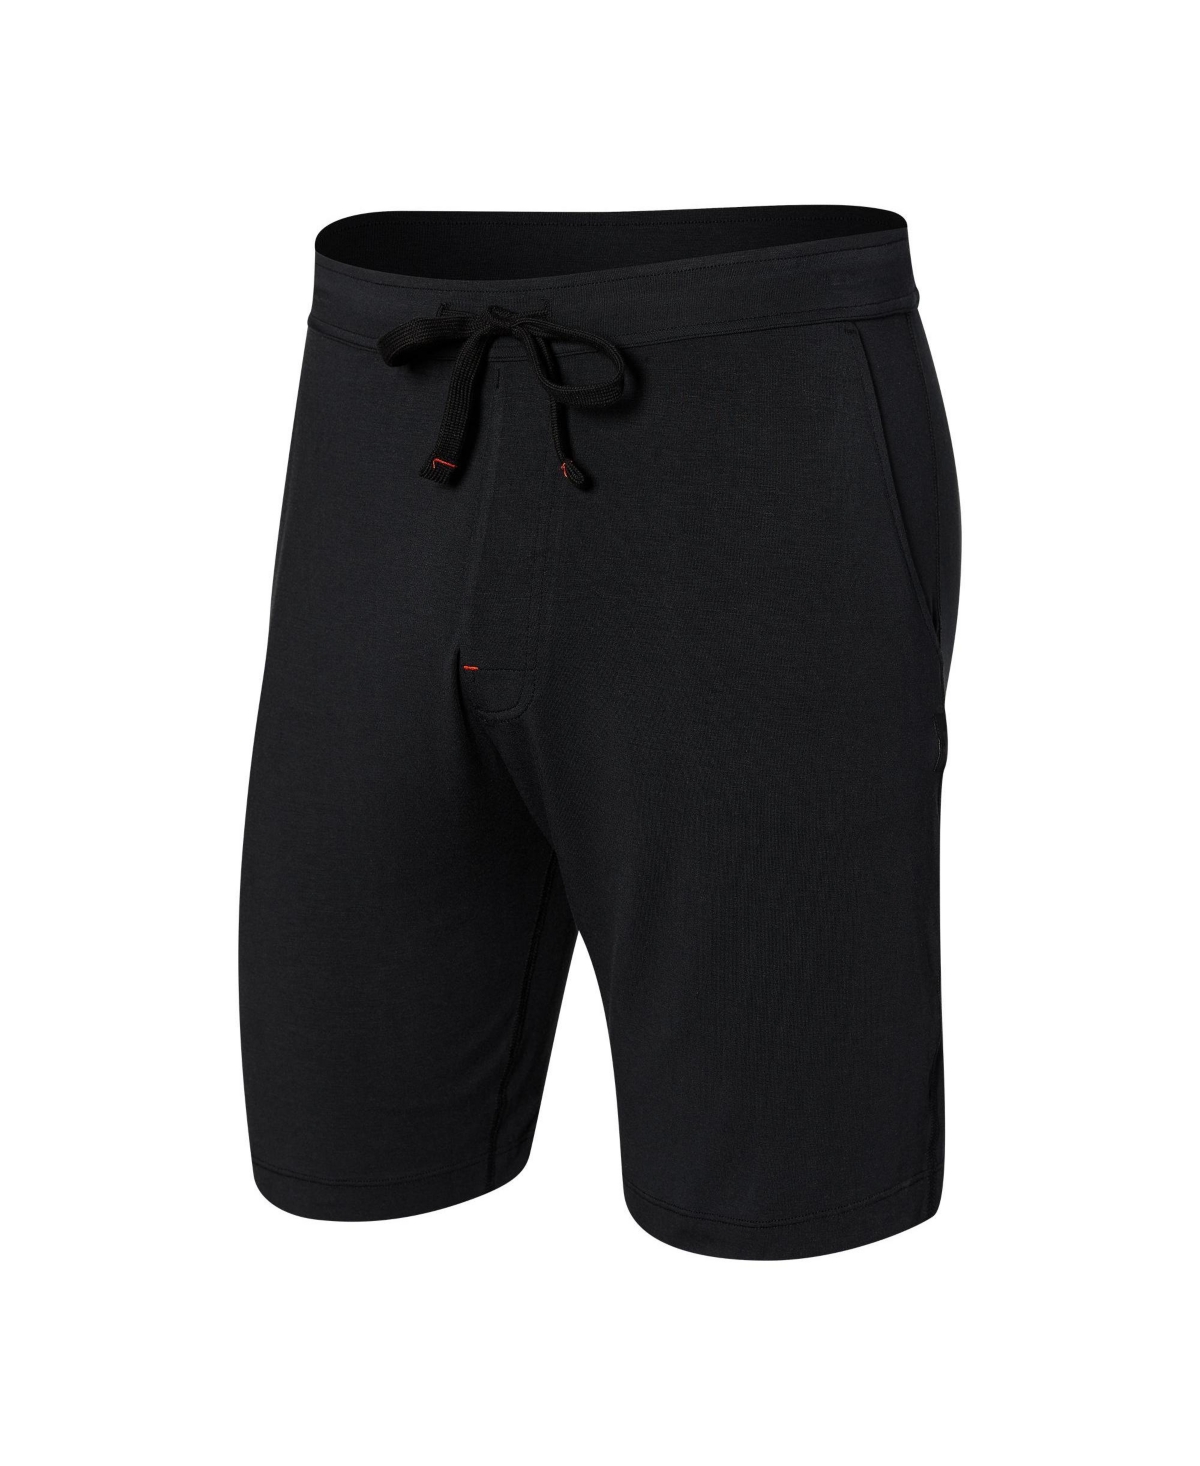 Saxx Men's Snooze Relaxed Fit Sleep Shorts In Black